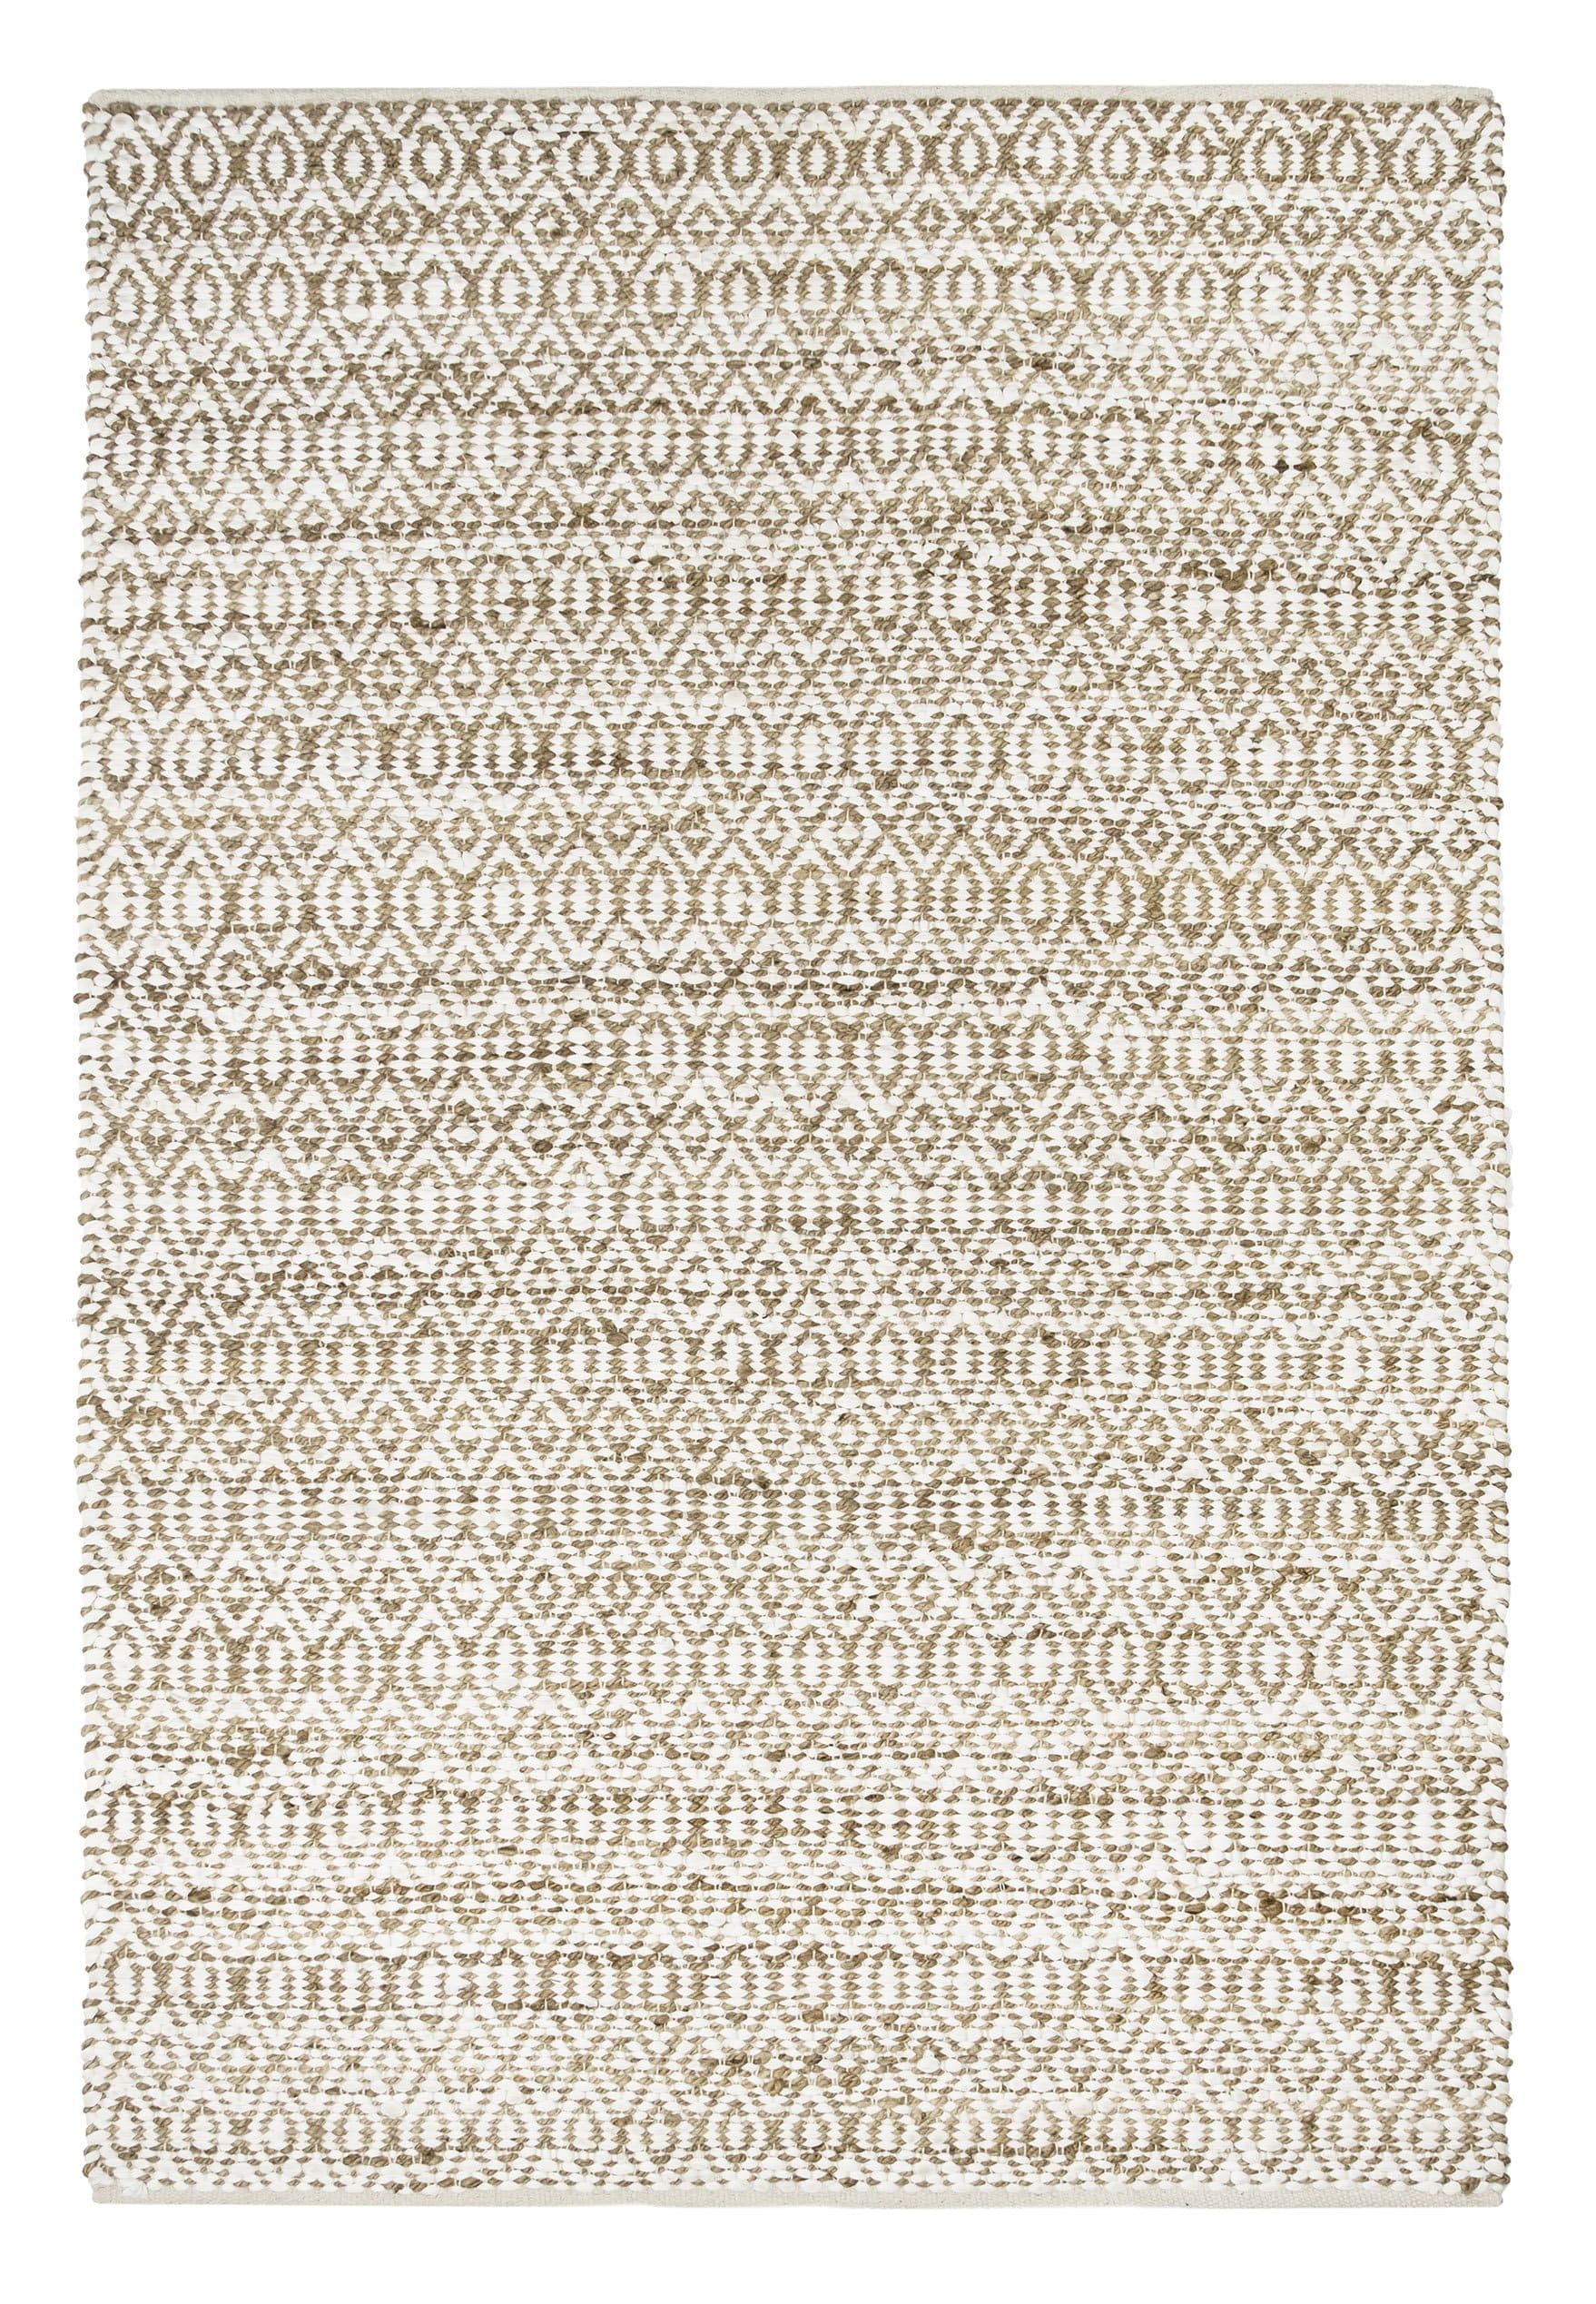 Burrow Diamonds Are Forever Rug in Beige